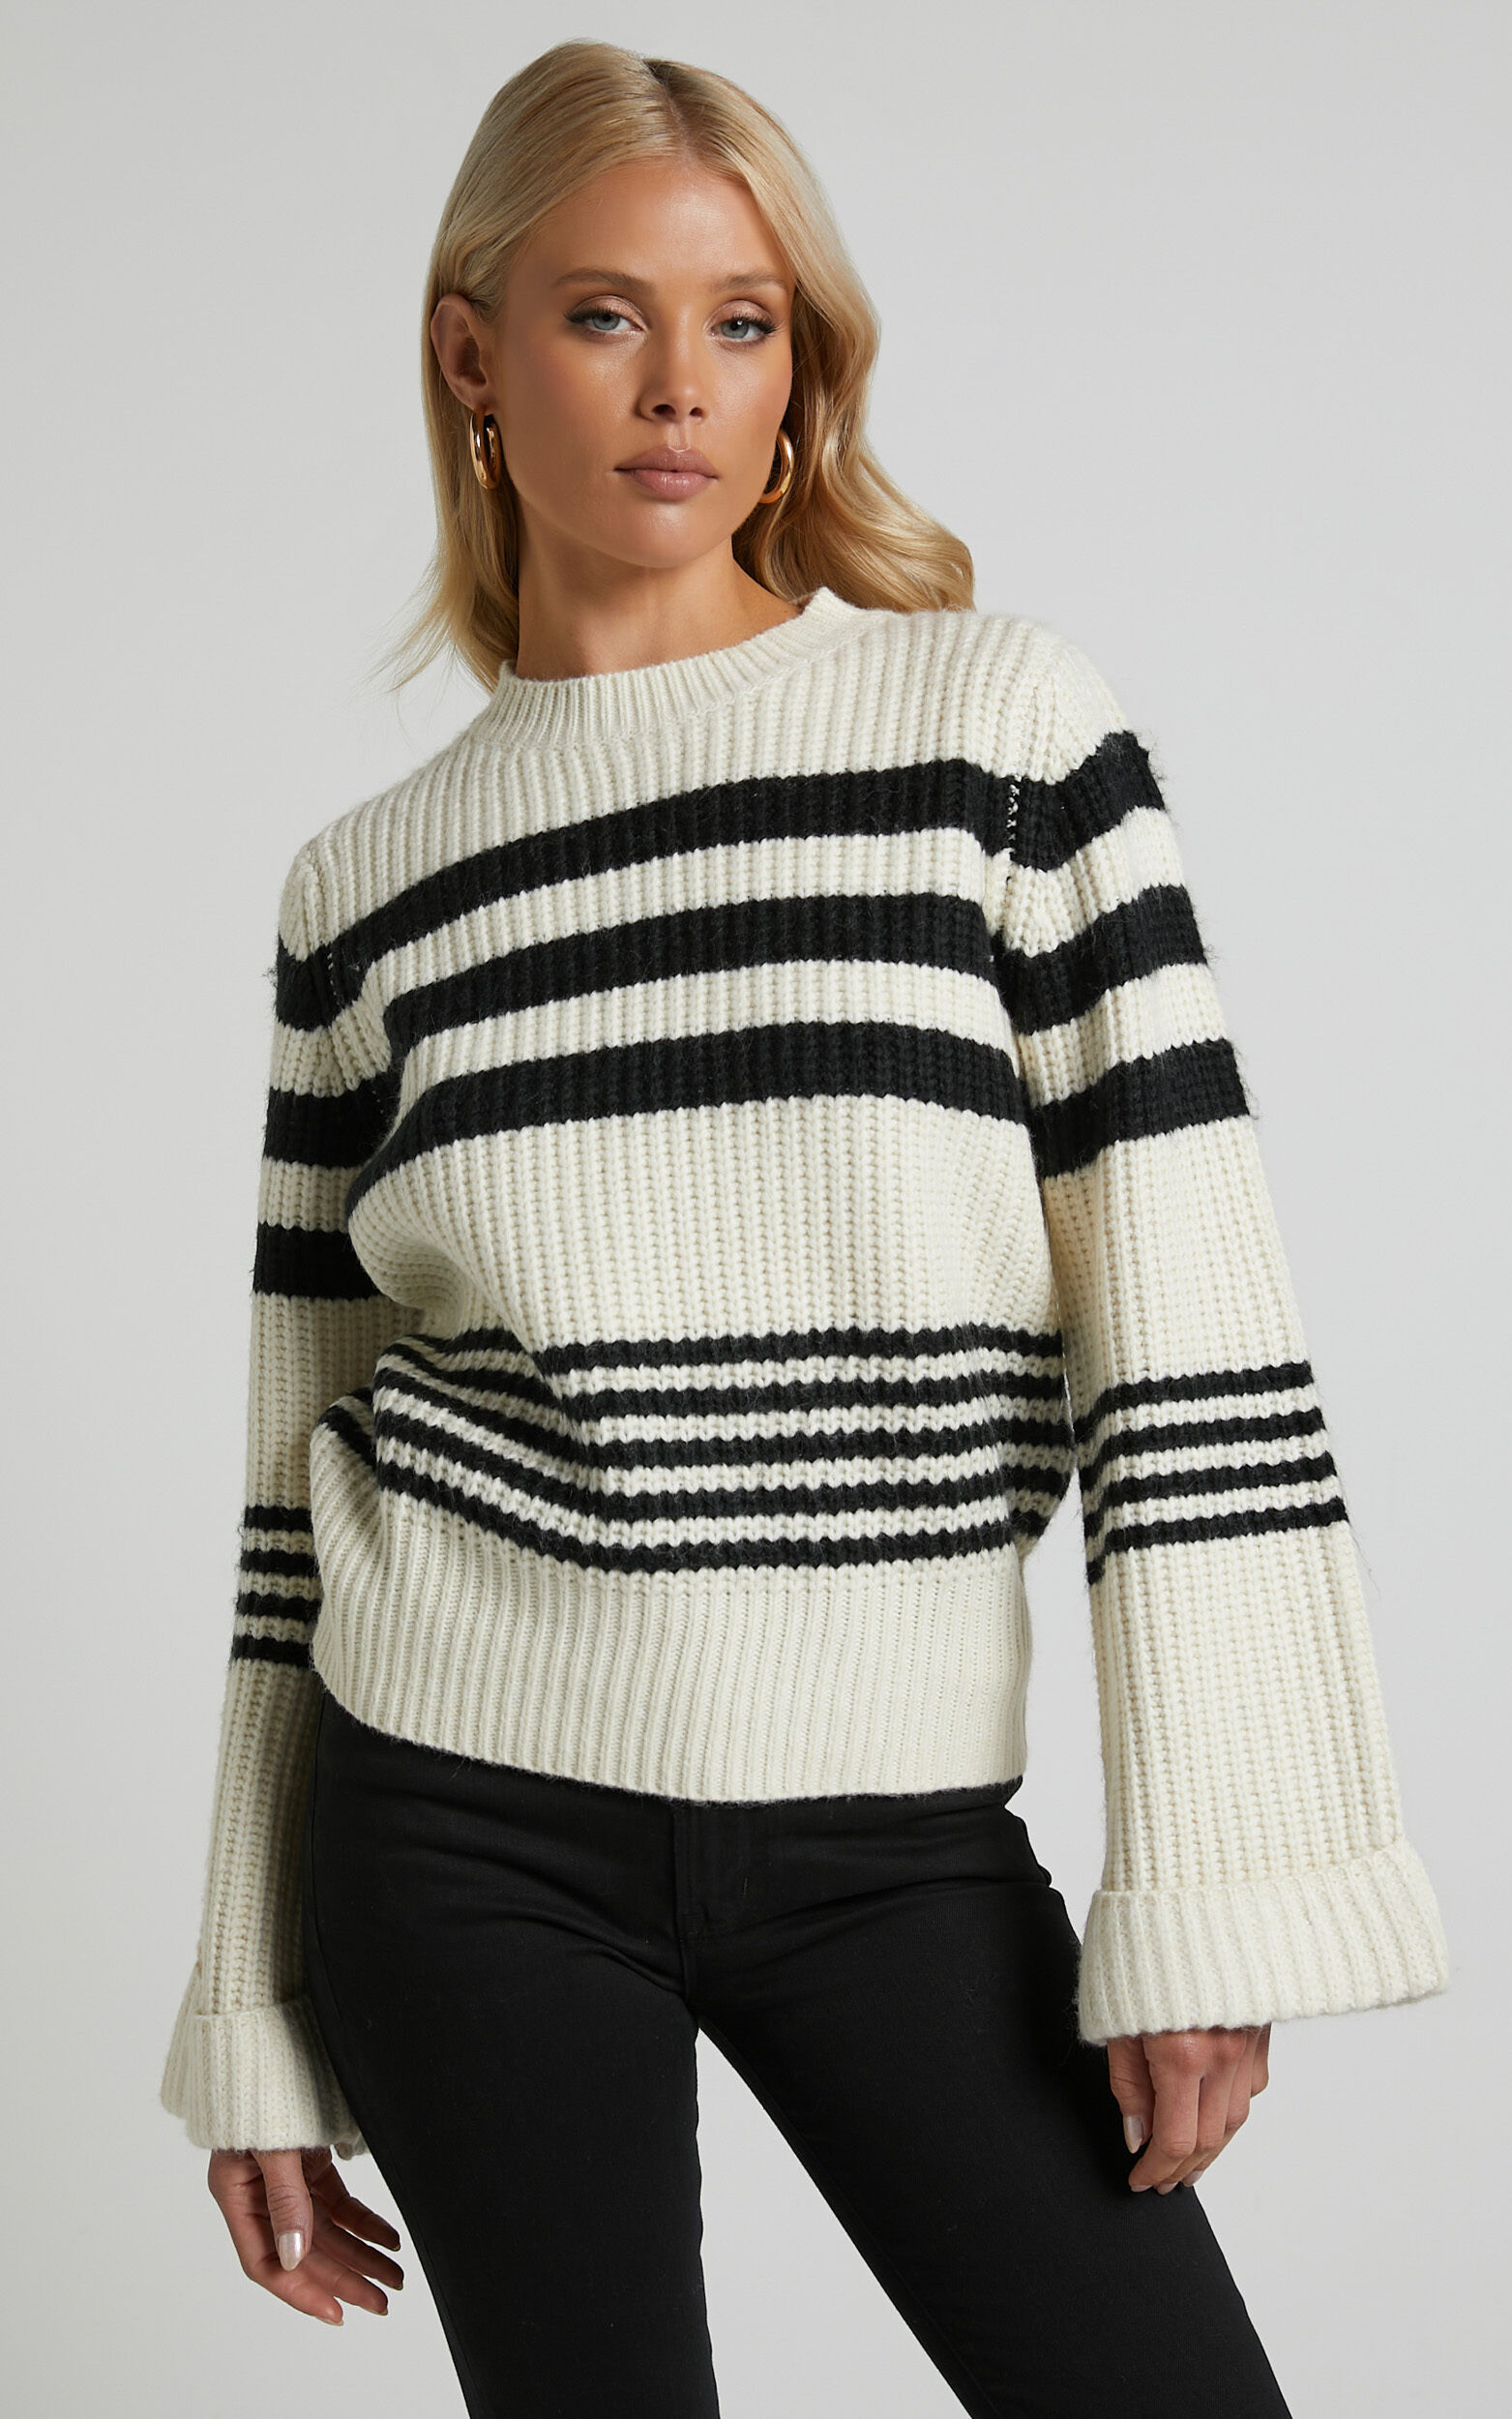 Pheney striped crew neck knit sweater in Cream and Black - 06, CRE1, super-hi-res image number null